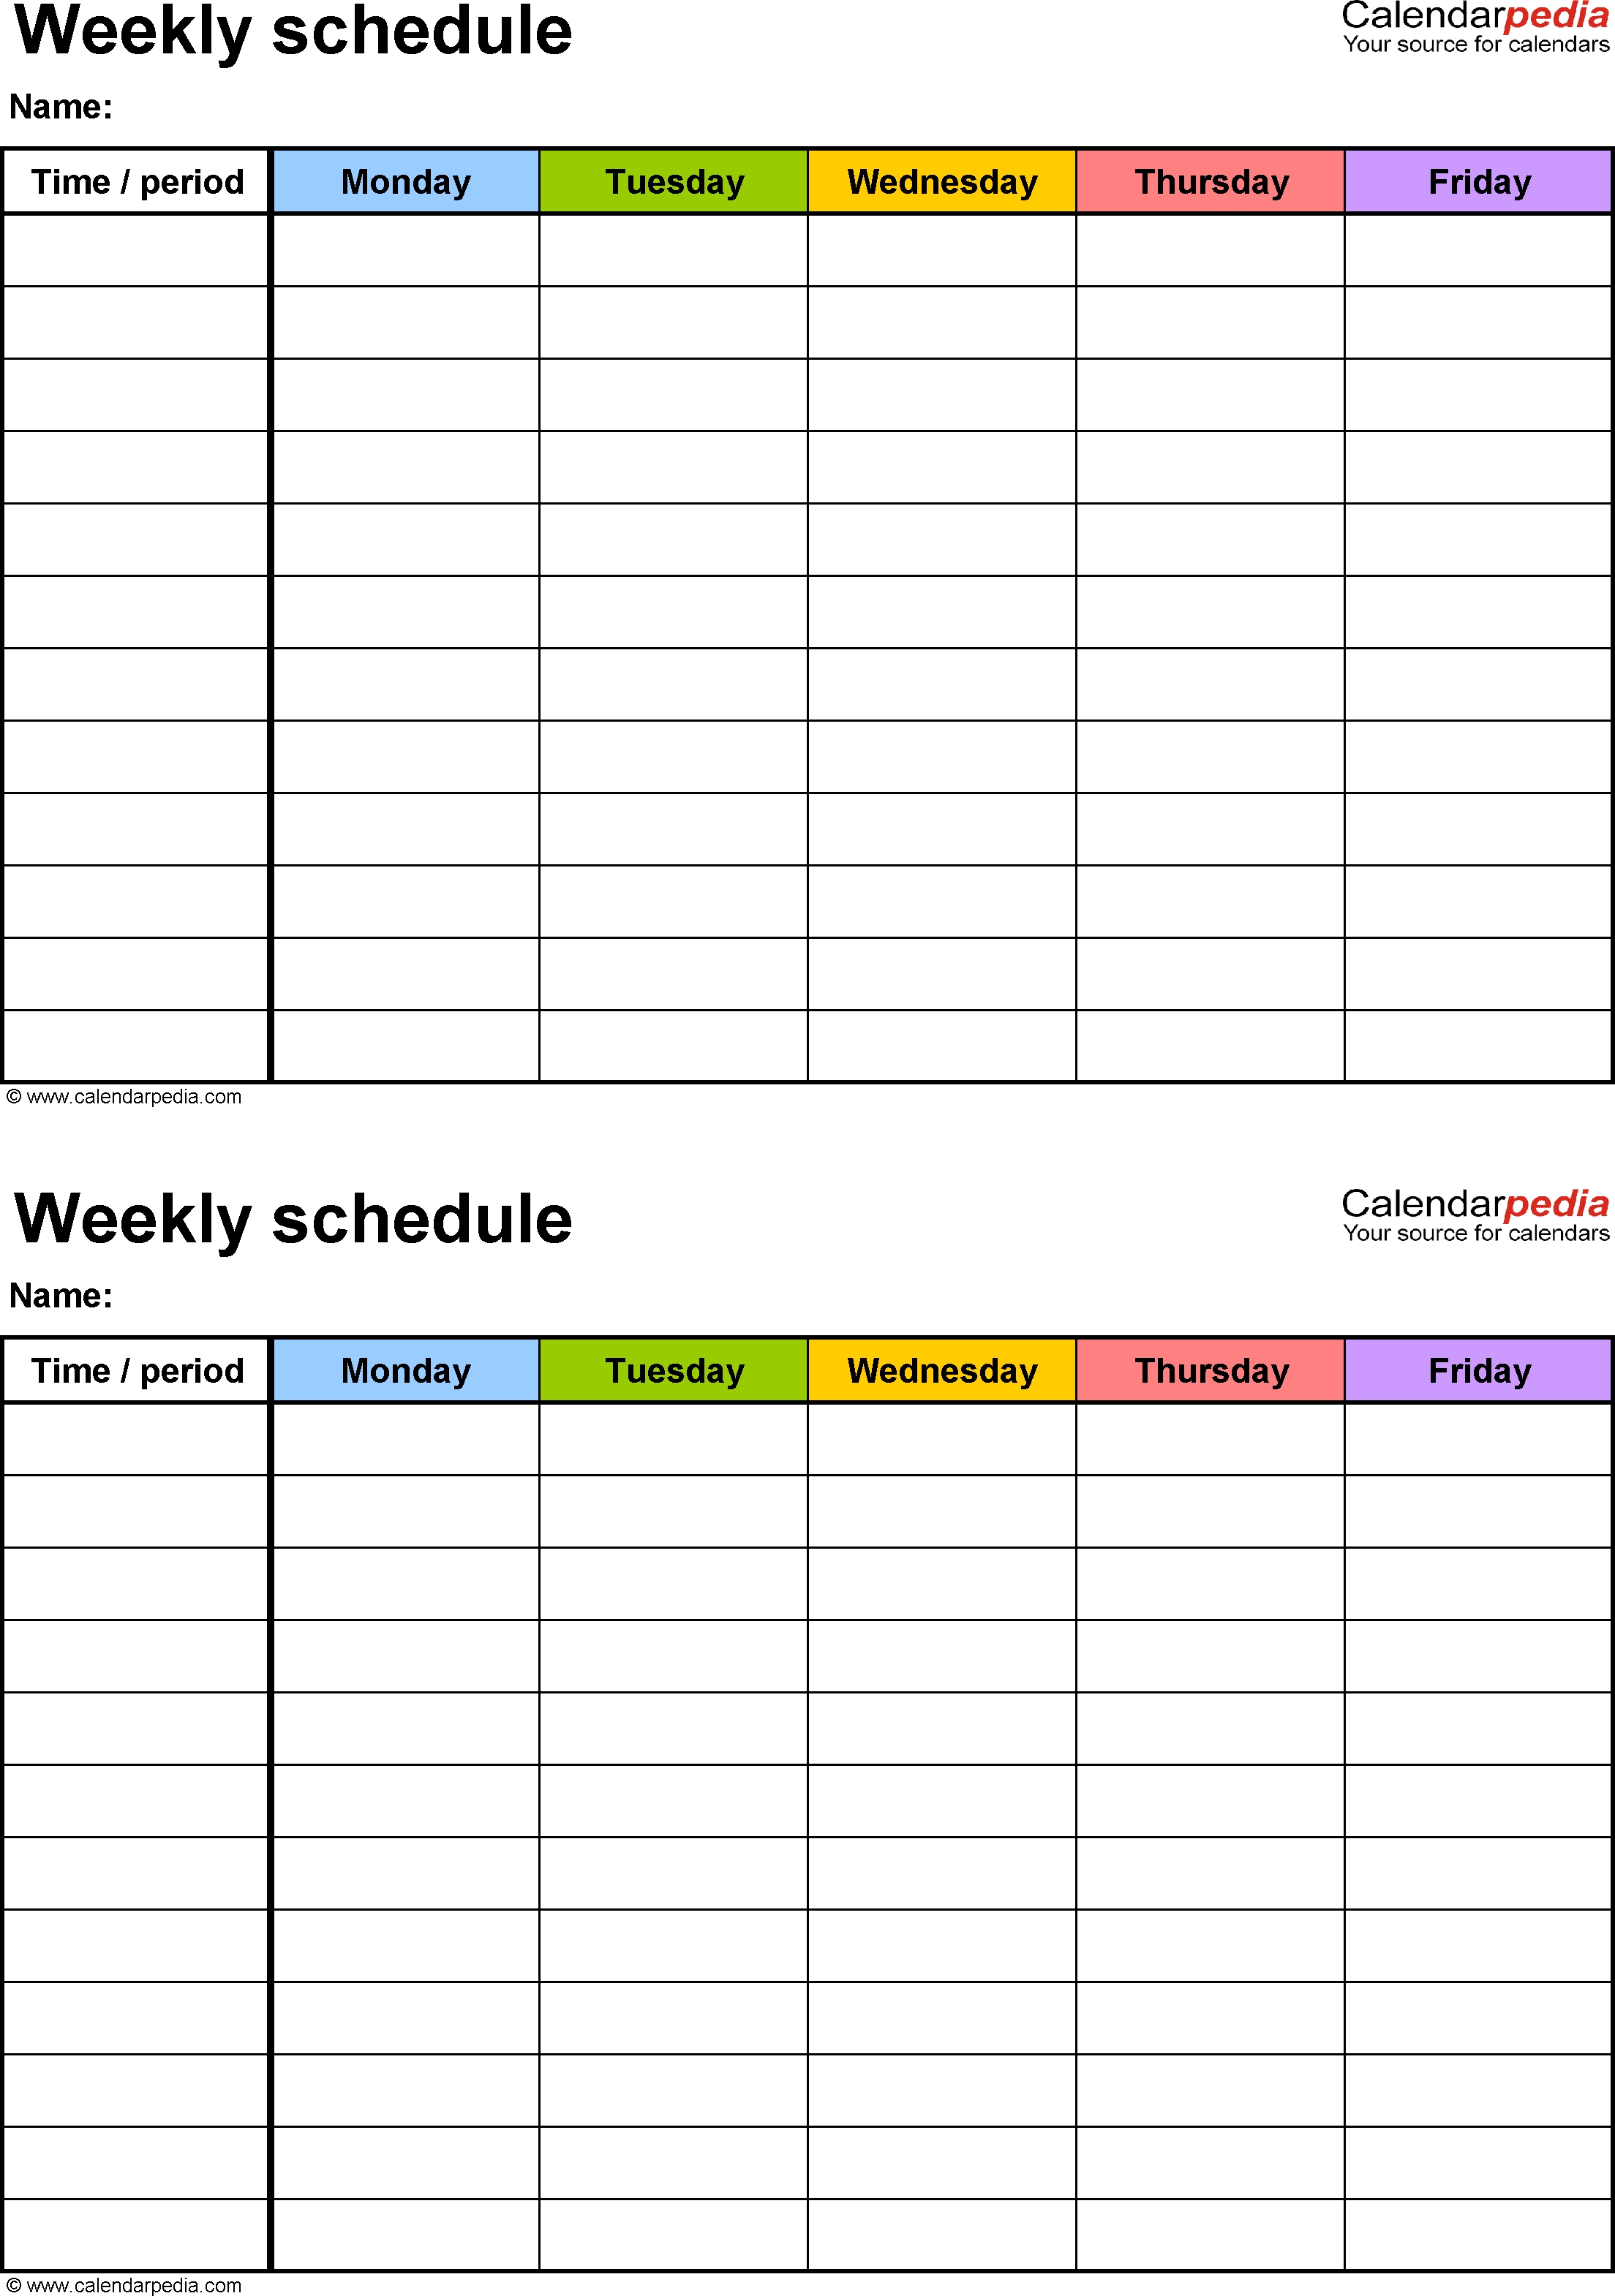 Free Weekly Schedule Templates For Excel - 18 Templates pertaining to 5 Day Weekly Timetable Blank 6 Periods